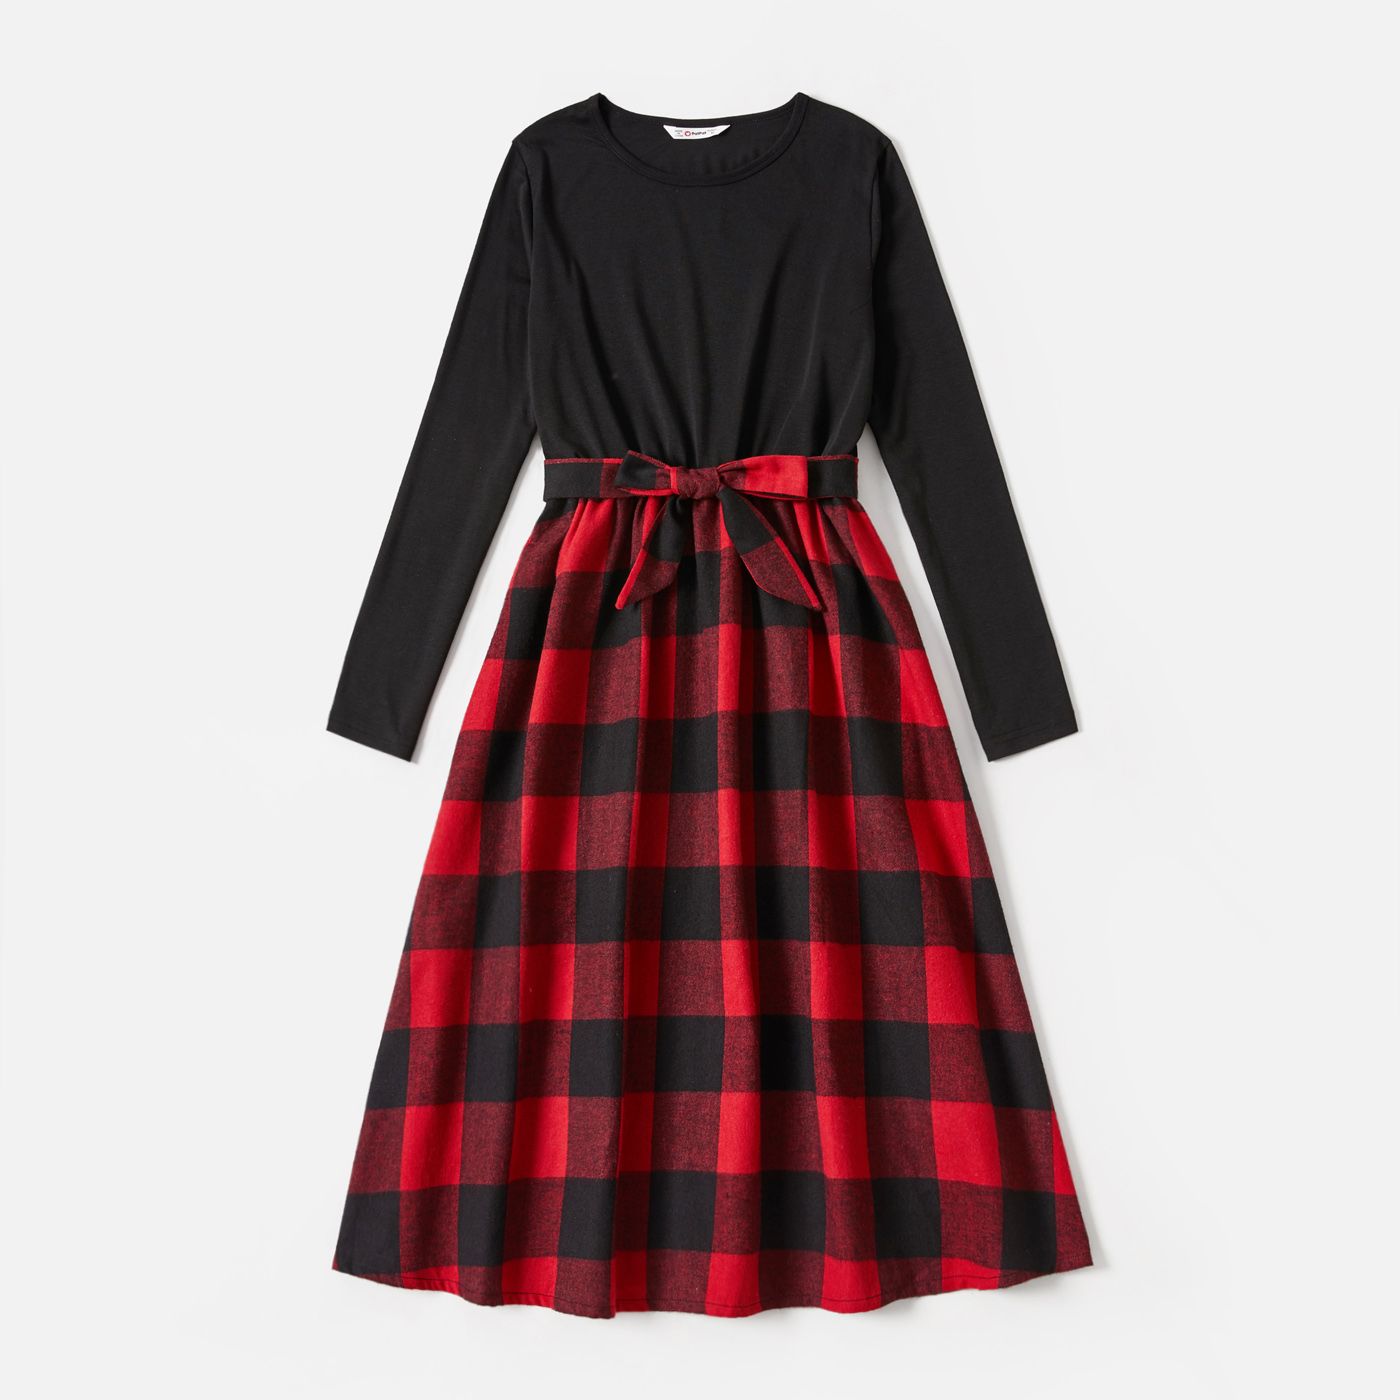 Family Matching Red Plaid Shirts And Black Long-Sleeve Splicing Red Plaid Dresses Sets